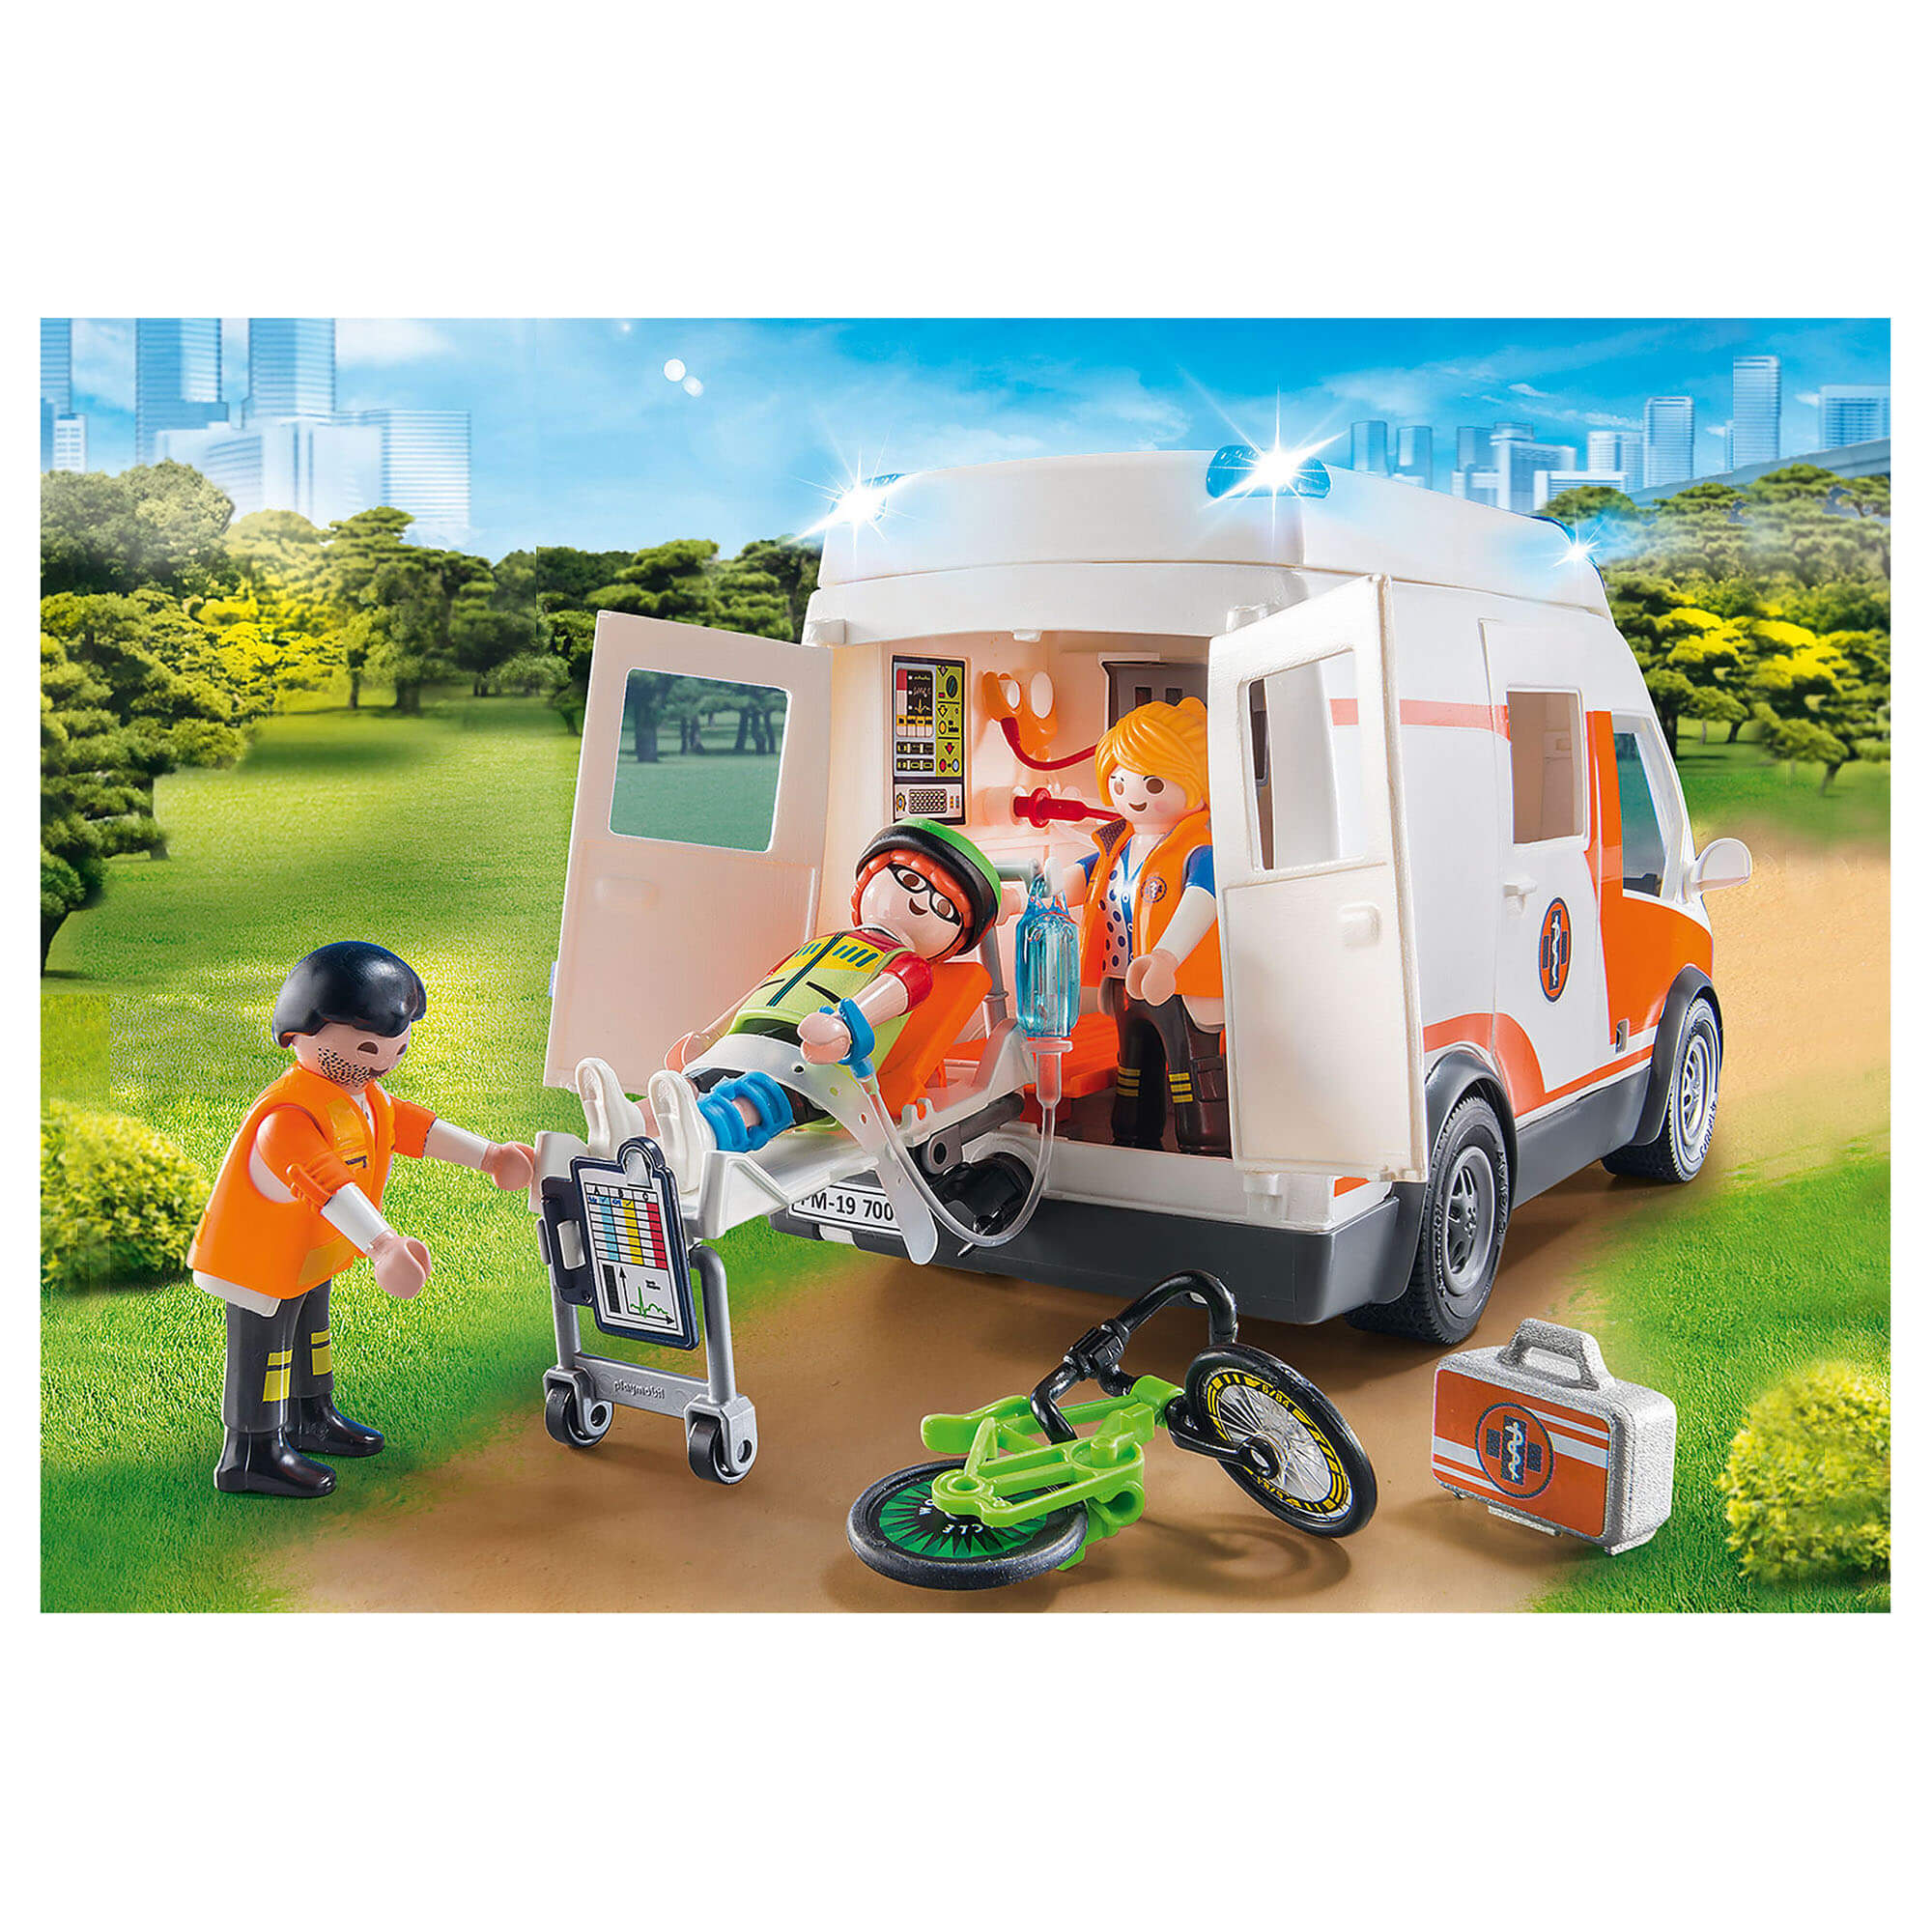 PLAYMOBIL Rescue 911 Ambulance with Flashing Lights (70049)